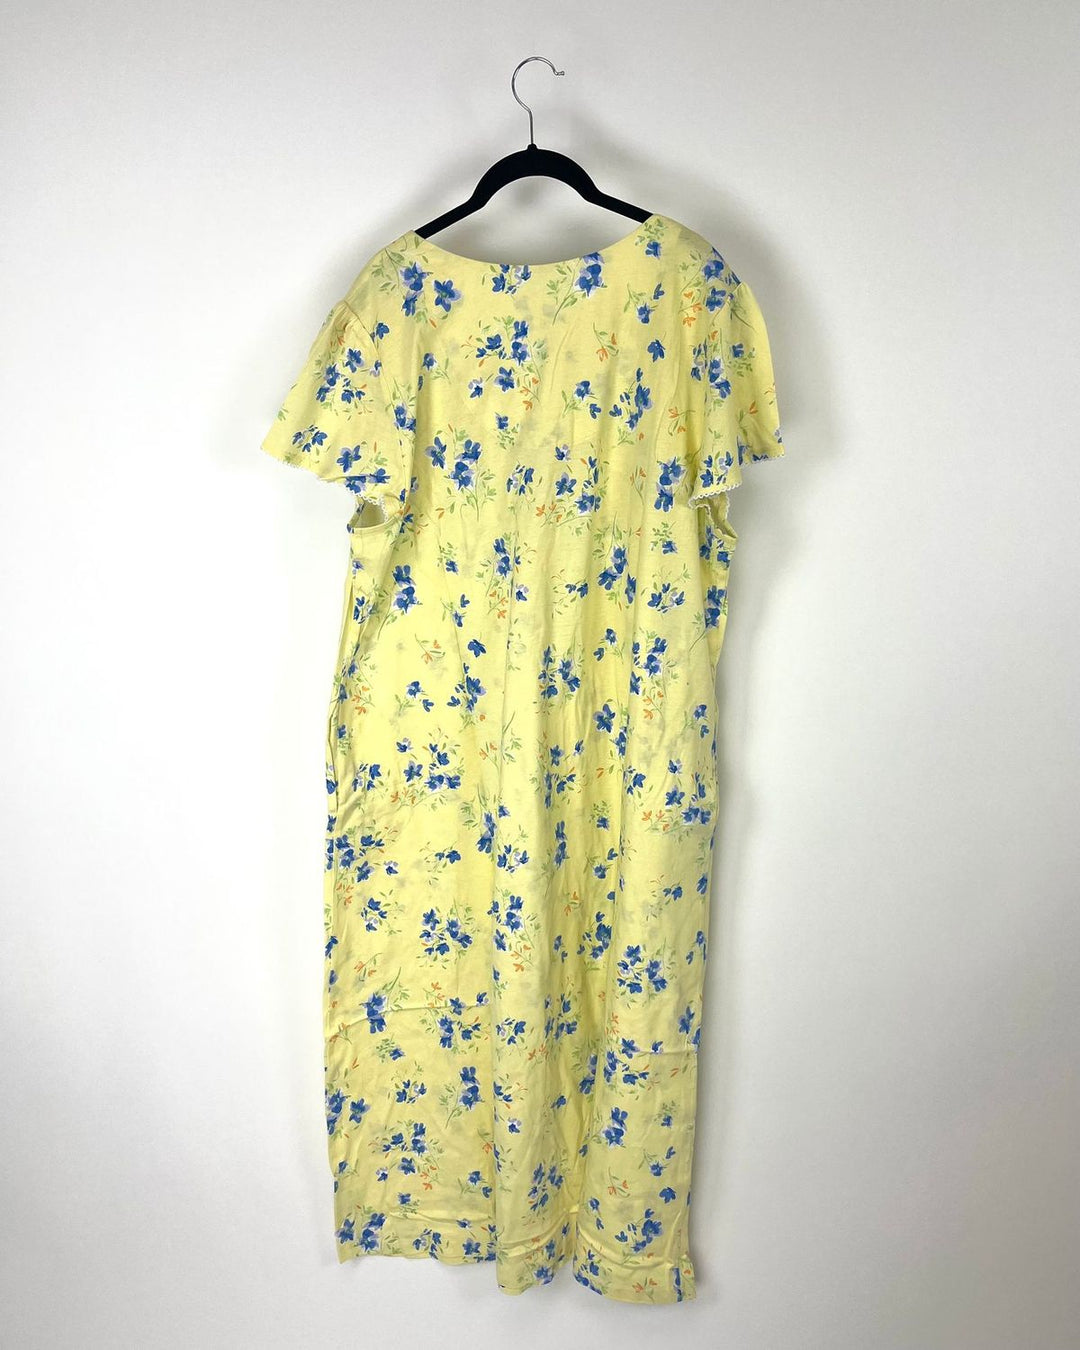 Yellow Floral Design Nightgown - Size 1X